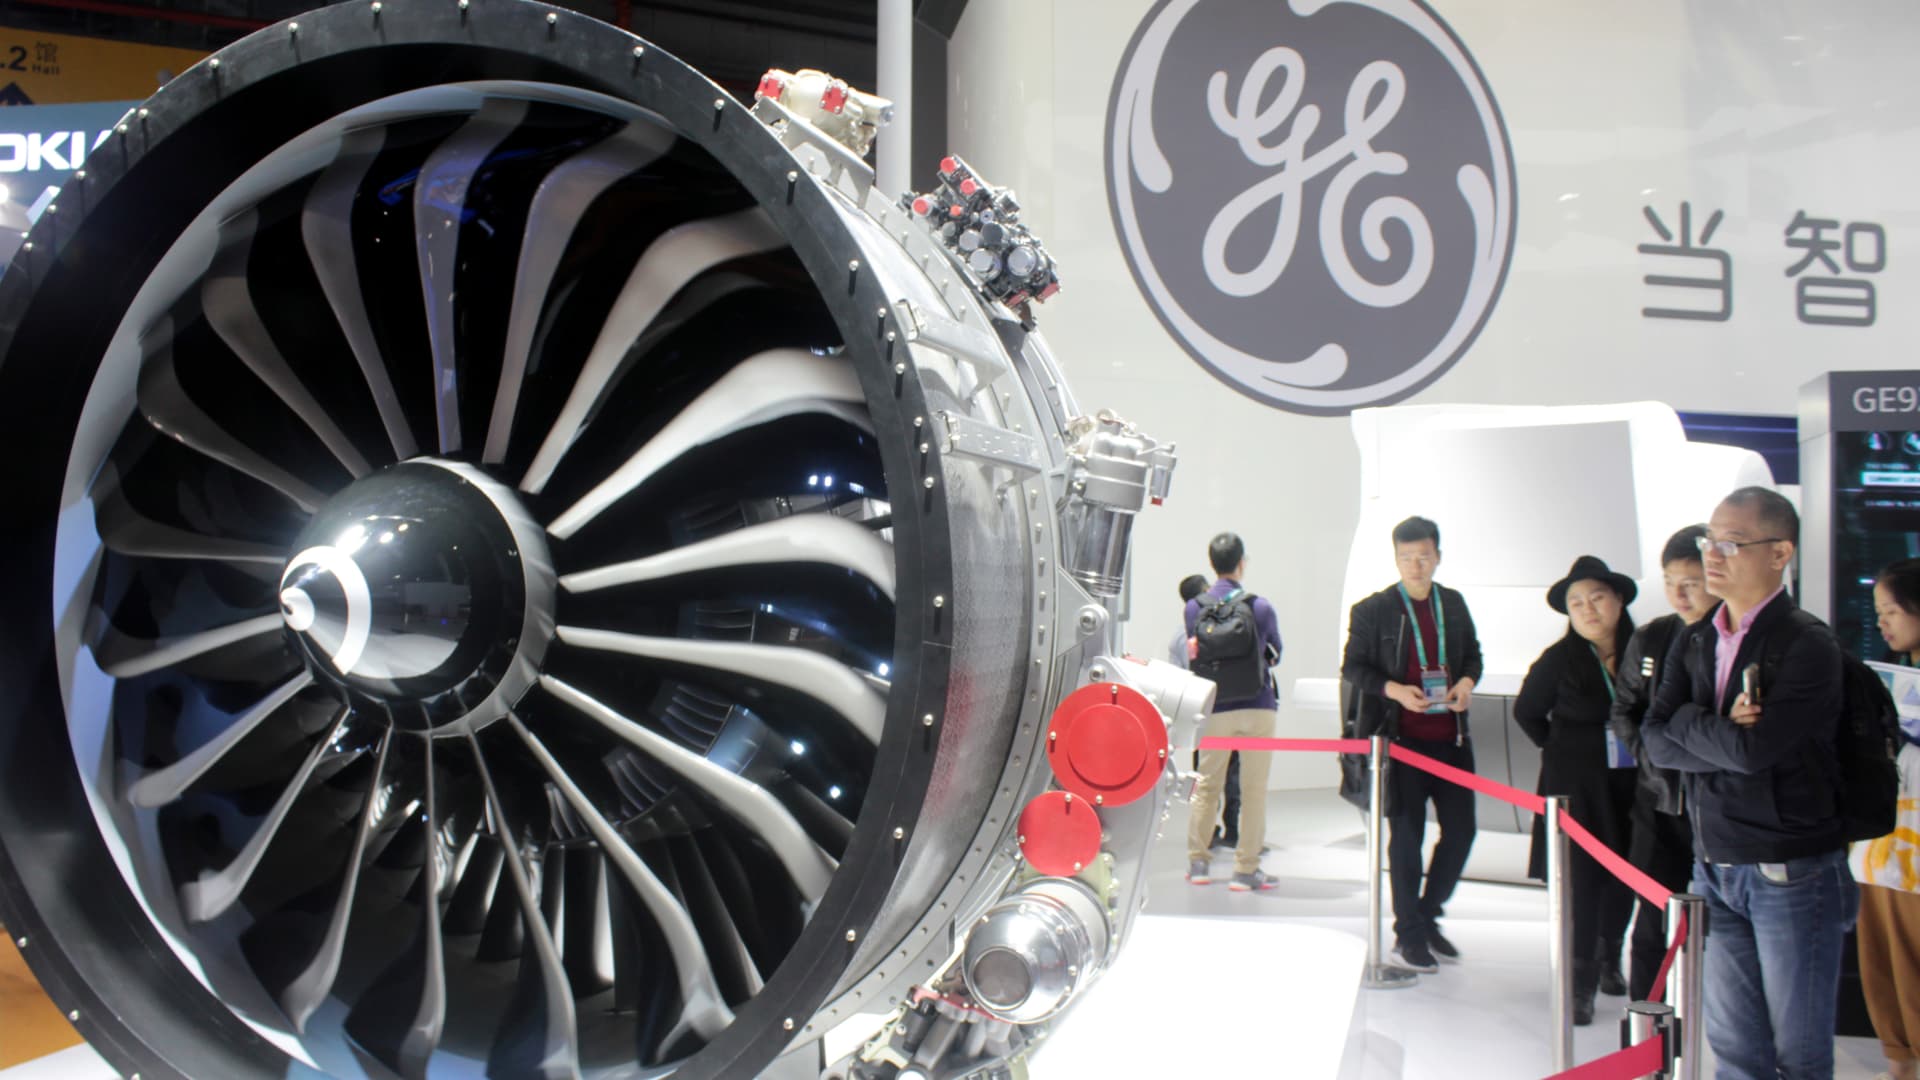 GE is revealing new company names as it approaches historic breakdown